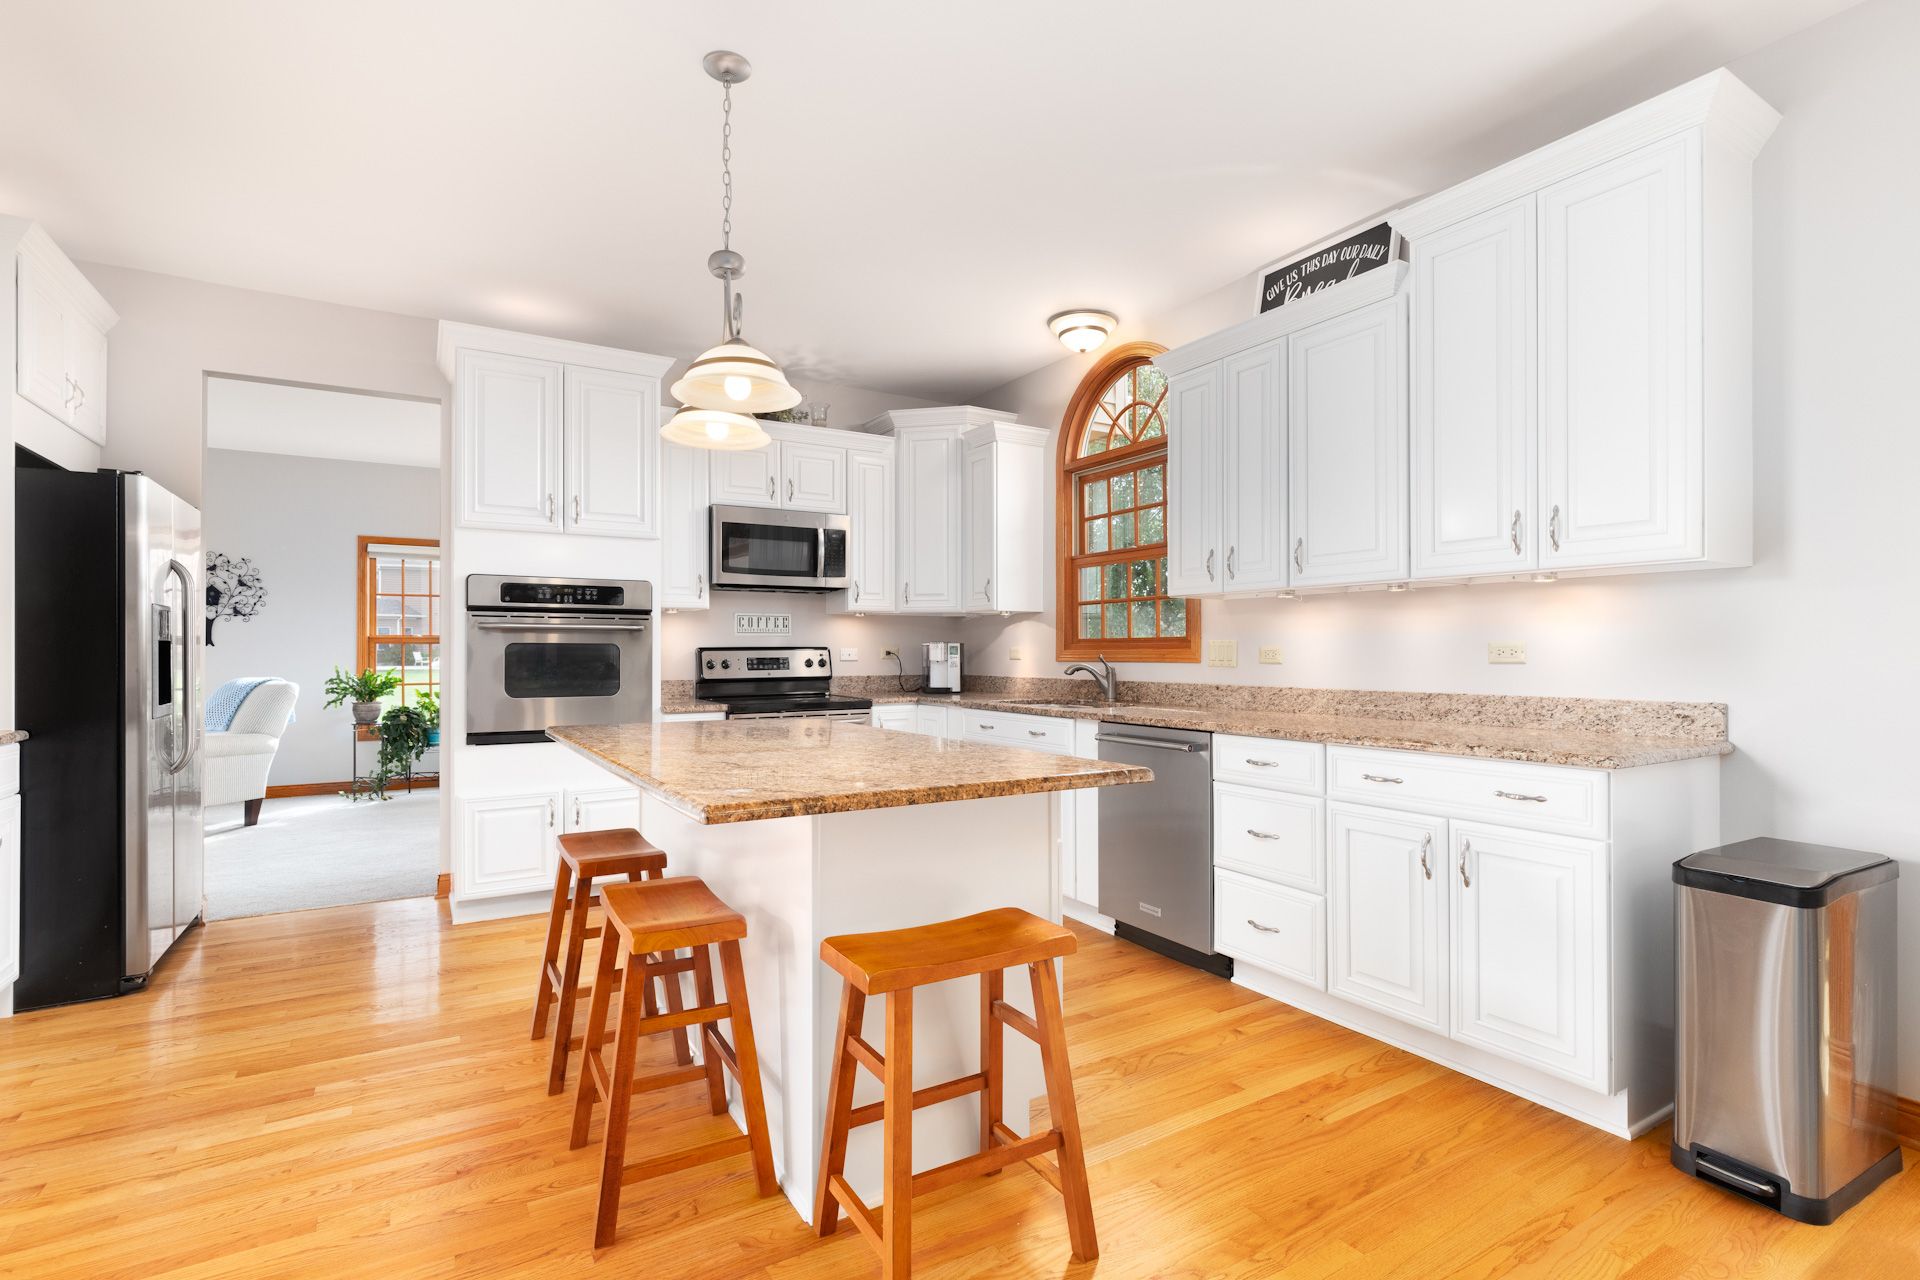 A kitchen with white cabinets, granite counter tops, stools and a trash can.